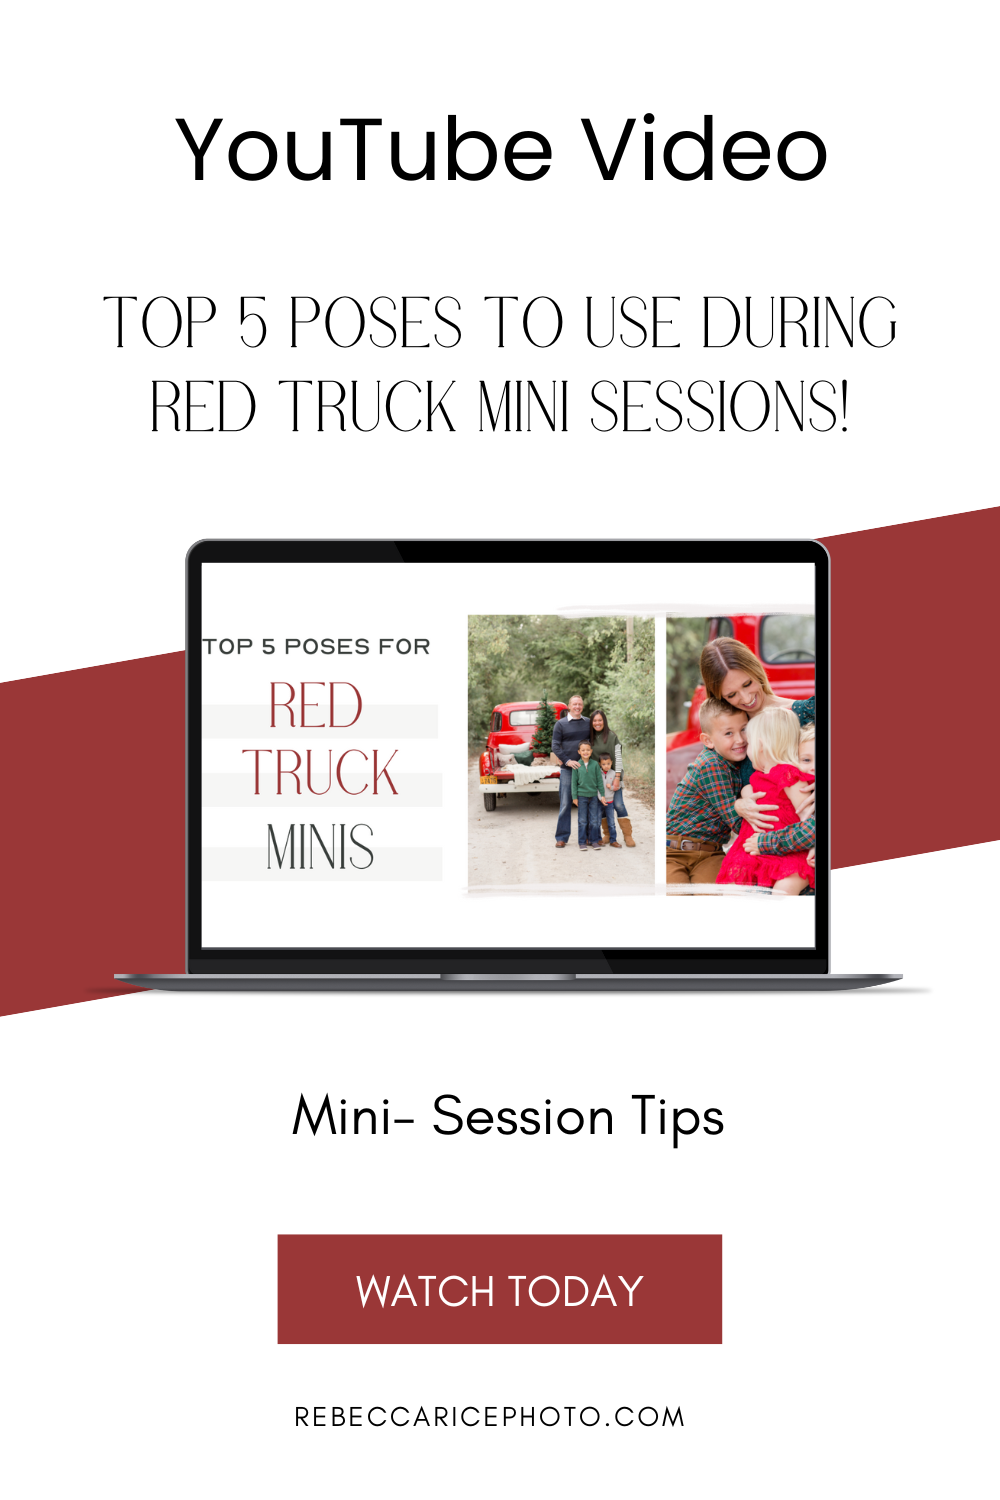 Top 5 Poses to use for Red Truck Minis! Watch on YouTube today! Click to watch NOW! -rebeccaricephoto.com